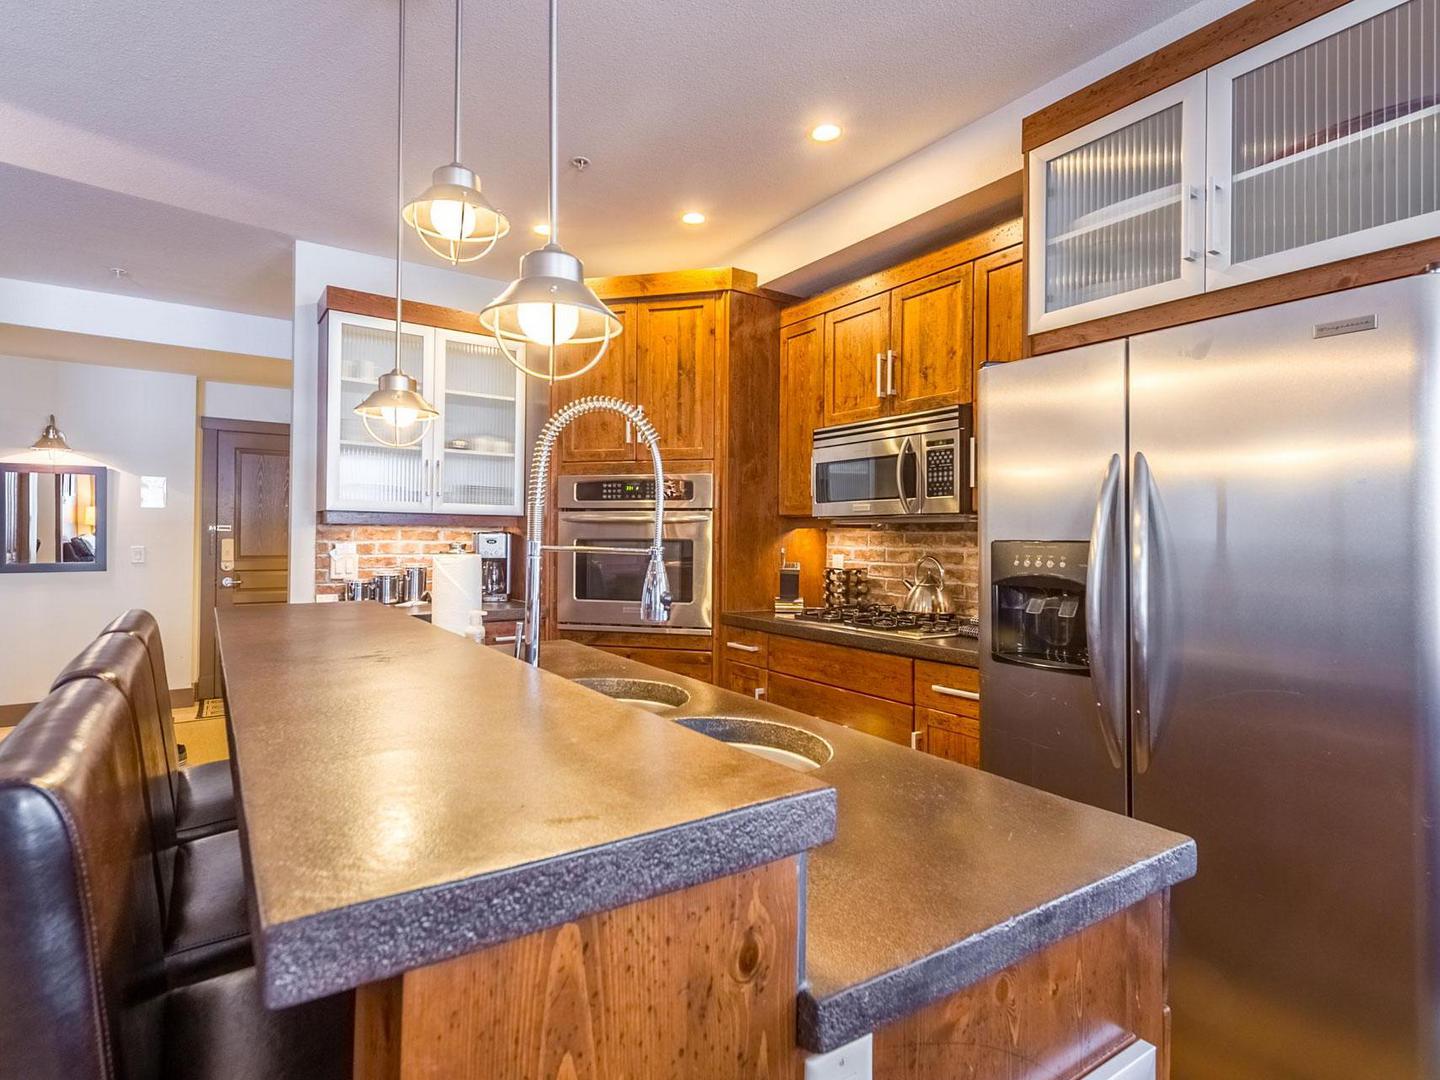 Timbers 301's luxury gourmet kitchen with stainless steel appliances and modern touches, managed by Luxury Mountain Vacation Rentals at Big White Ski Resort.